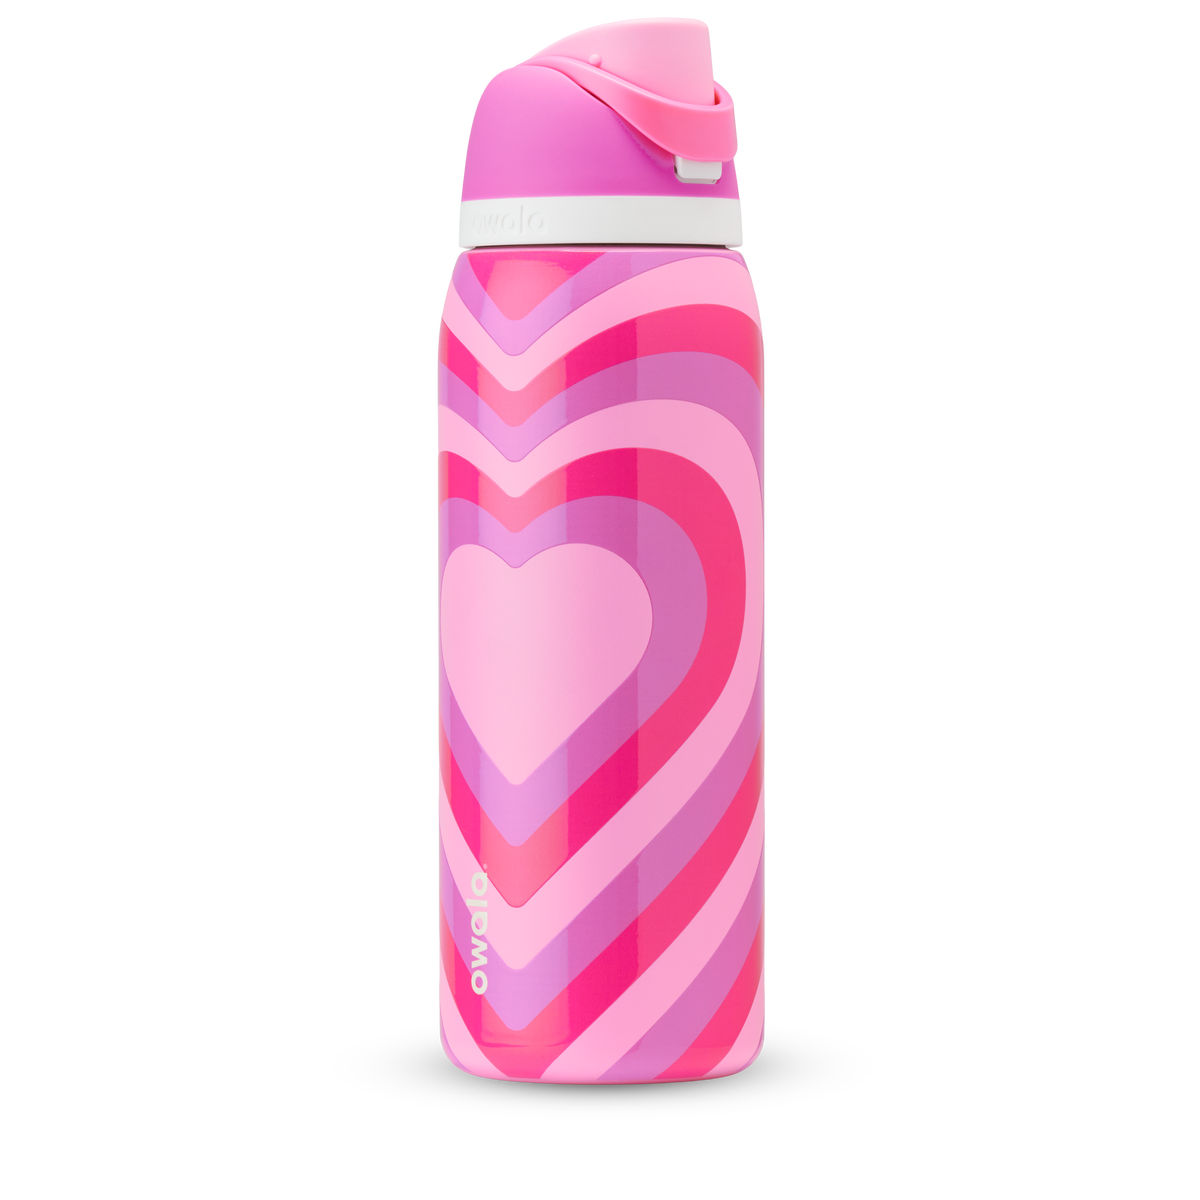 Exclusive hot pink Owala water bottle, Video published by Danielle_eeee